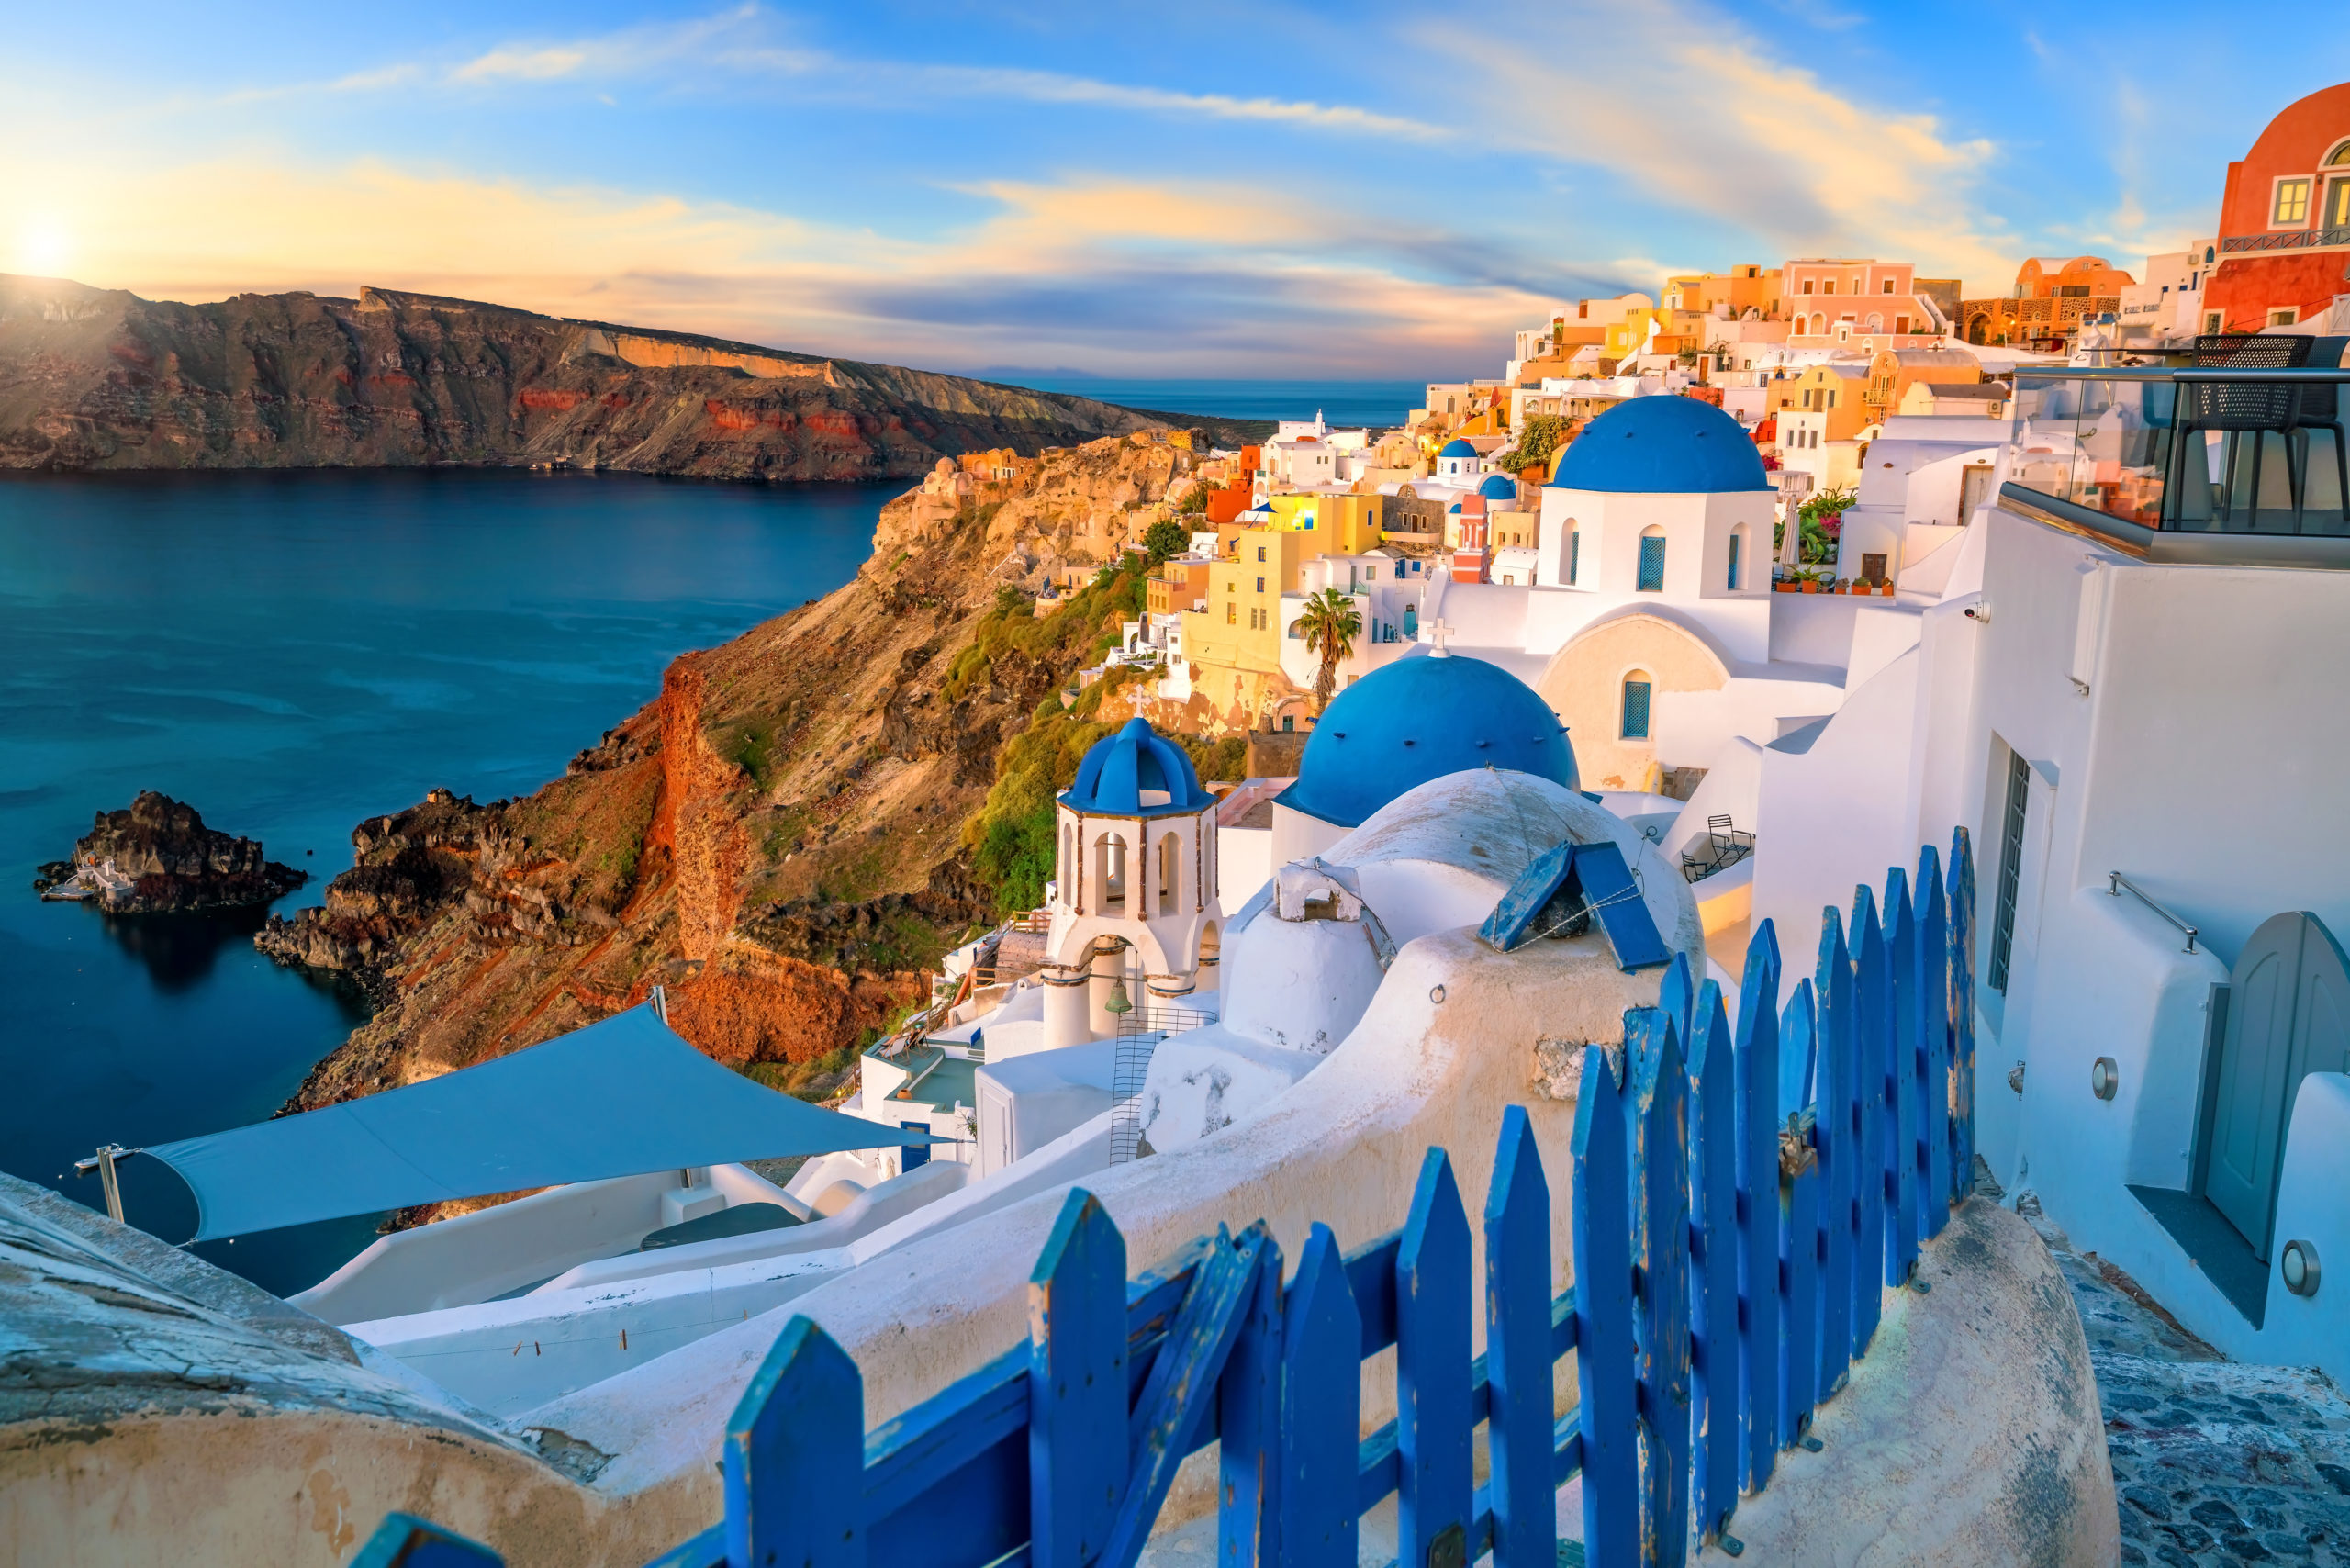 7 Interesting and Unique Places to Visit While in Santorini